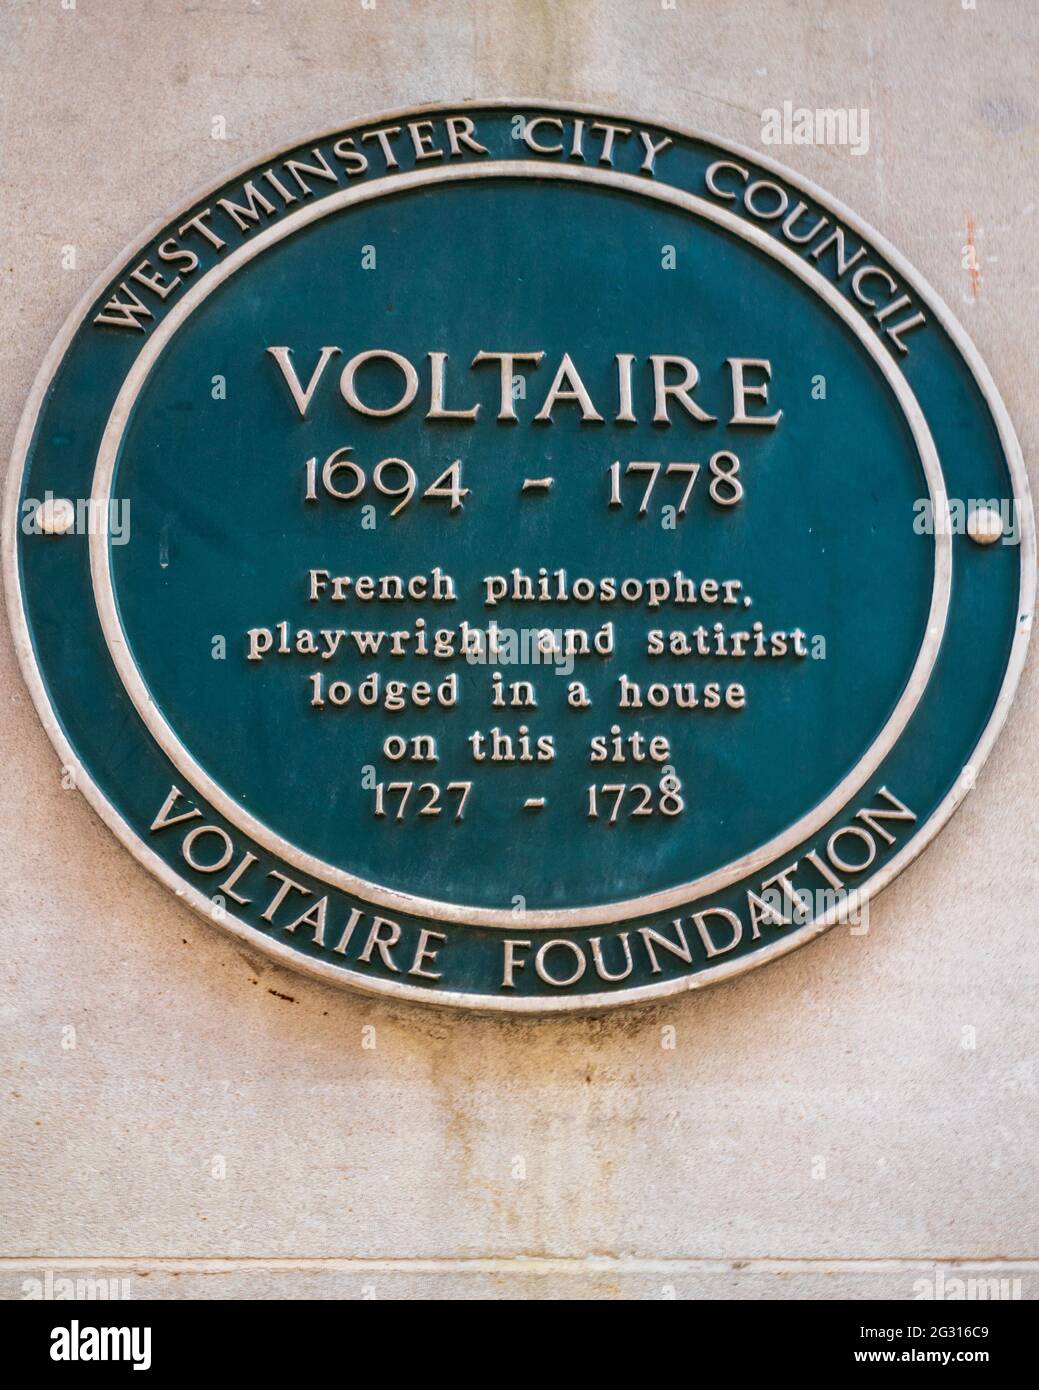 Voltaire Blue Plaque London - Voltaire Green Plaque - Voltaire 1694 - 1778 french philosopher & playright lodged in a house on this site 1727 - 1728 Stock Photo